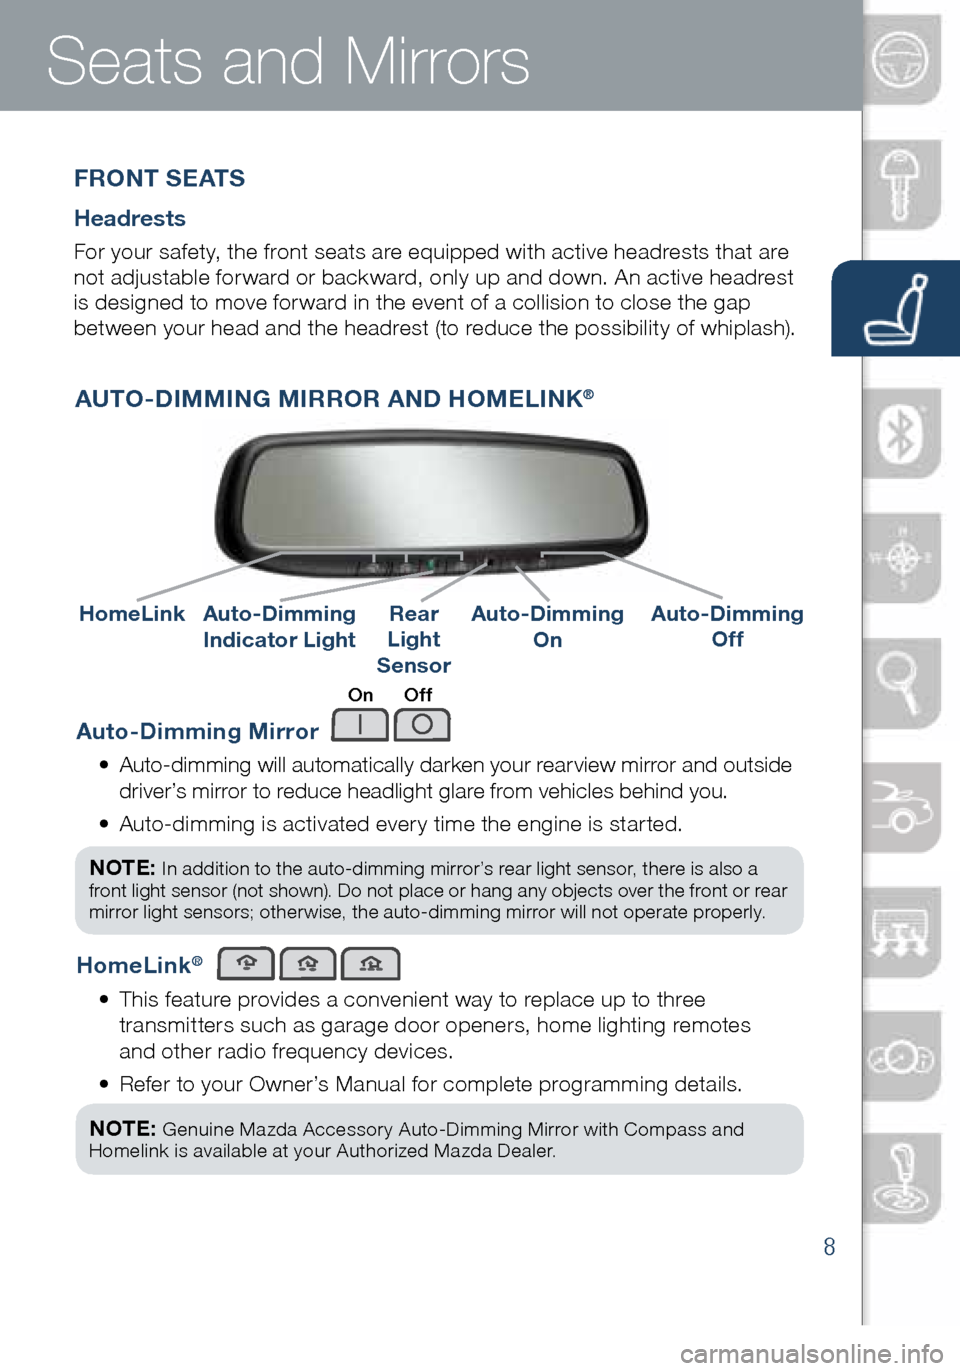 MAZDA MODEL MX-5 2016  Smart Start Guide (in English) 8
Auto-Dimming Mirror
•   Auto-dimming will automatically darken your rearview mirror and outside 
driver’s mirror to reduce headlight glare from vehicles behind you. 
•    Auto-dimming is activ